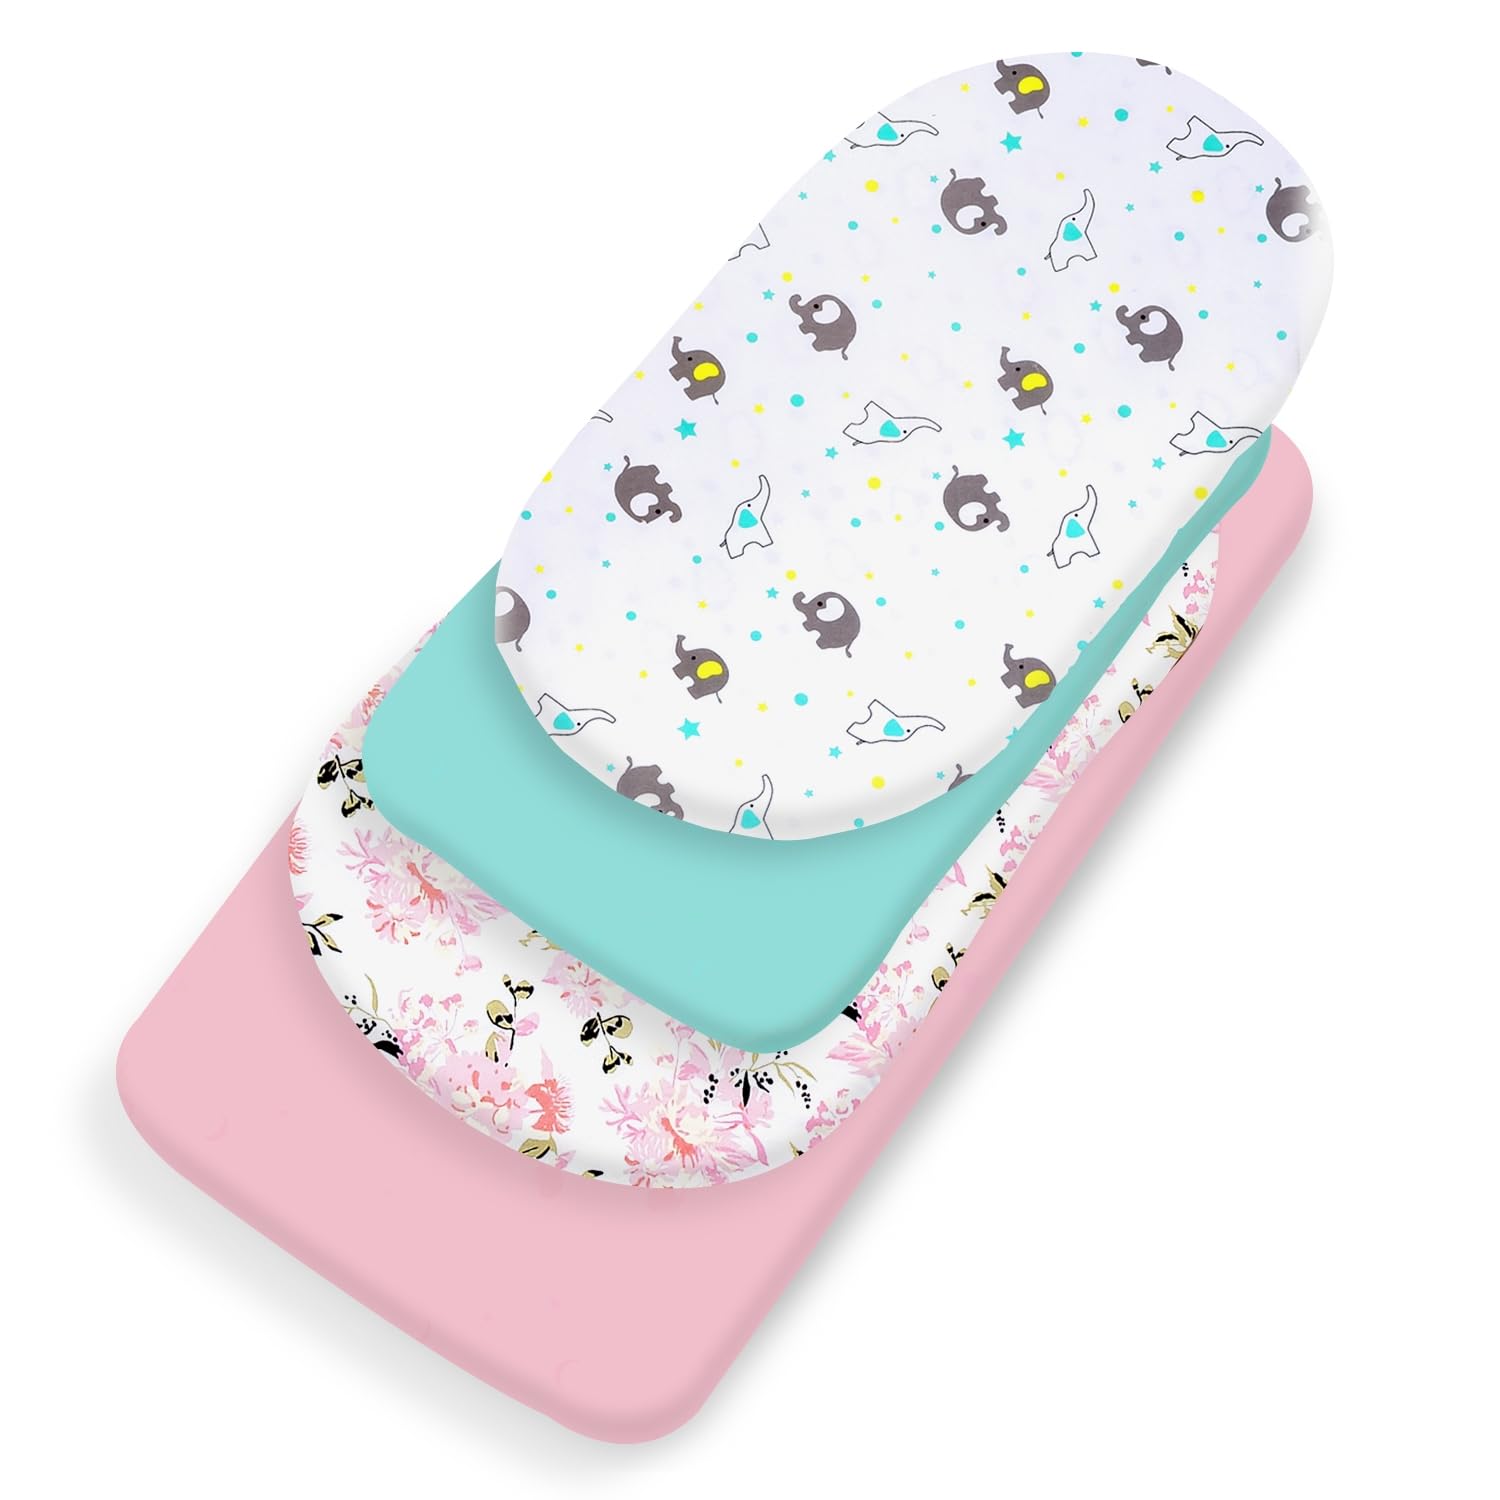 bimocosy Bassinet Sheet, 4 Pack Bassinet Sheets for Baby Girls Boys, Soft Baby Bassinet Fitted Sheets Neutral for Standard Bassinet Mattress, Size 32 x 16 x 4 Inches, Floral/Elephant/Pink/Green